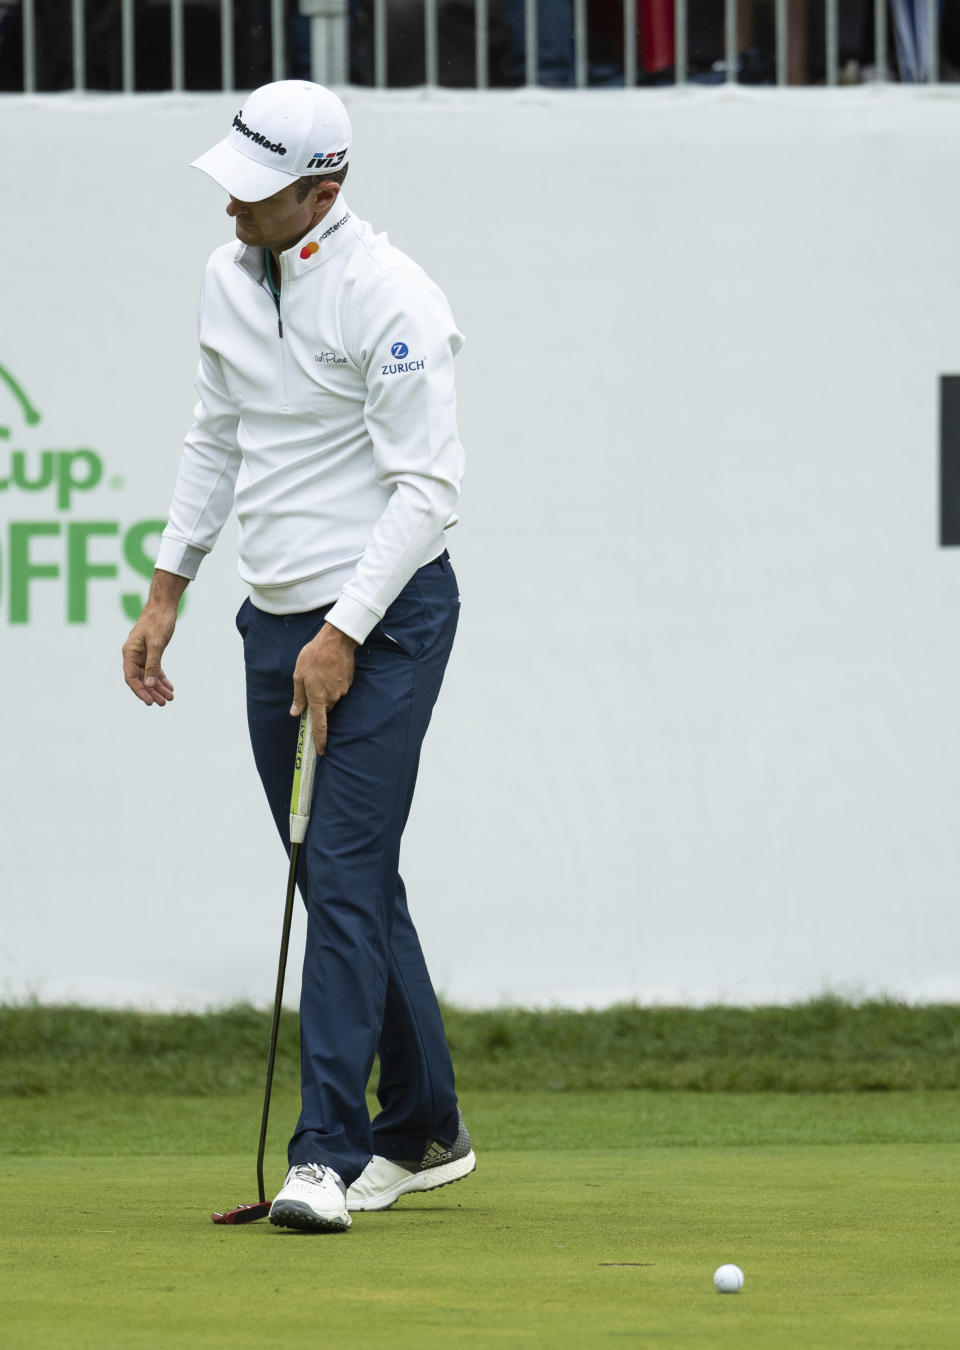 Justin Rose, of England, reacts to missing a putt for par in the playoff hole during the BMW Championship golf tournament at the Aronimink Golf Club, Monday, Sept. 10, 2018, in Newtown Square, Pa. Keegan Bradley held off Justin Rose in a sudden-death playoff to win the rain-plagued BMW Championship for his first PGA Tour victory in six years. (AP Photo/Chris Szagola)